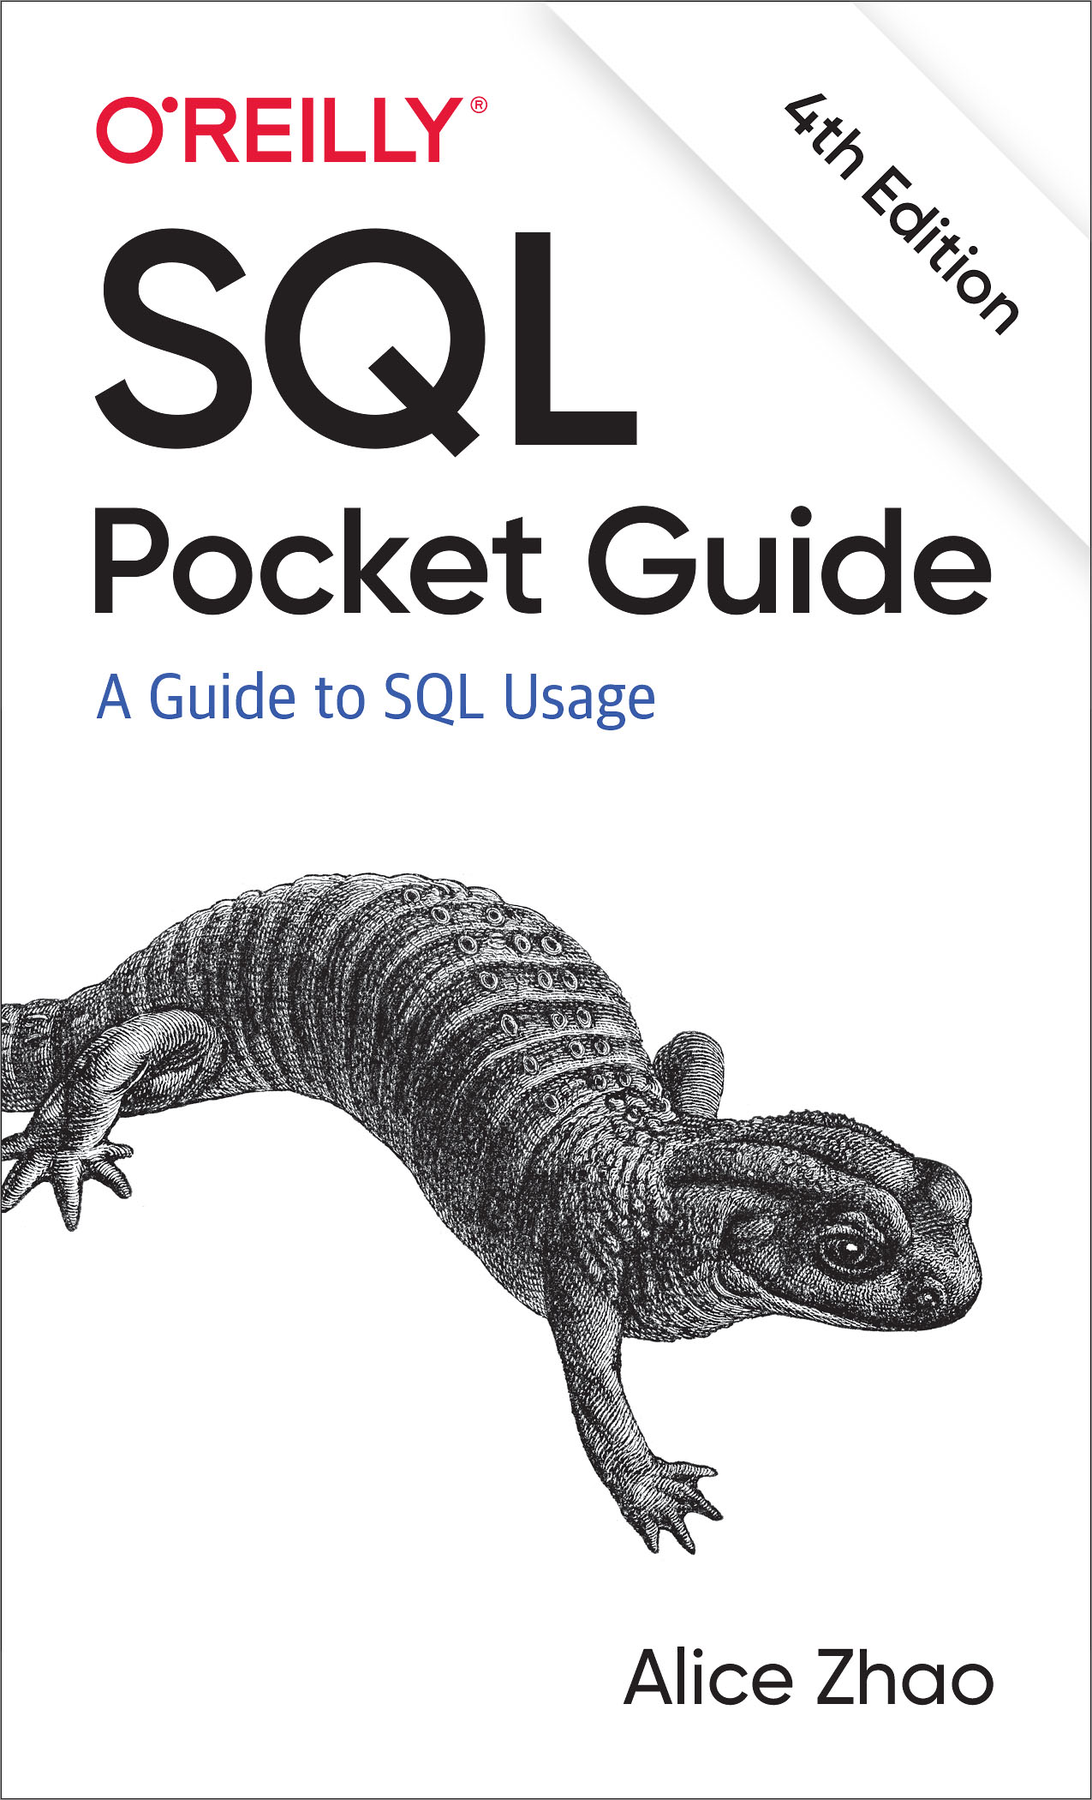 SQL Pocket Guide by Alice Zhao Copyright 2021 Alice Zhao All rights reserved - photo 1